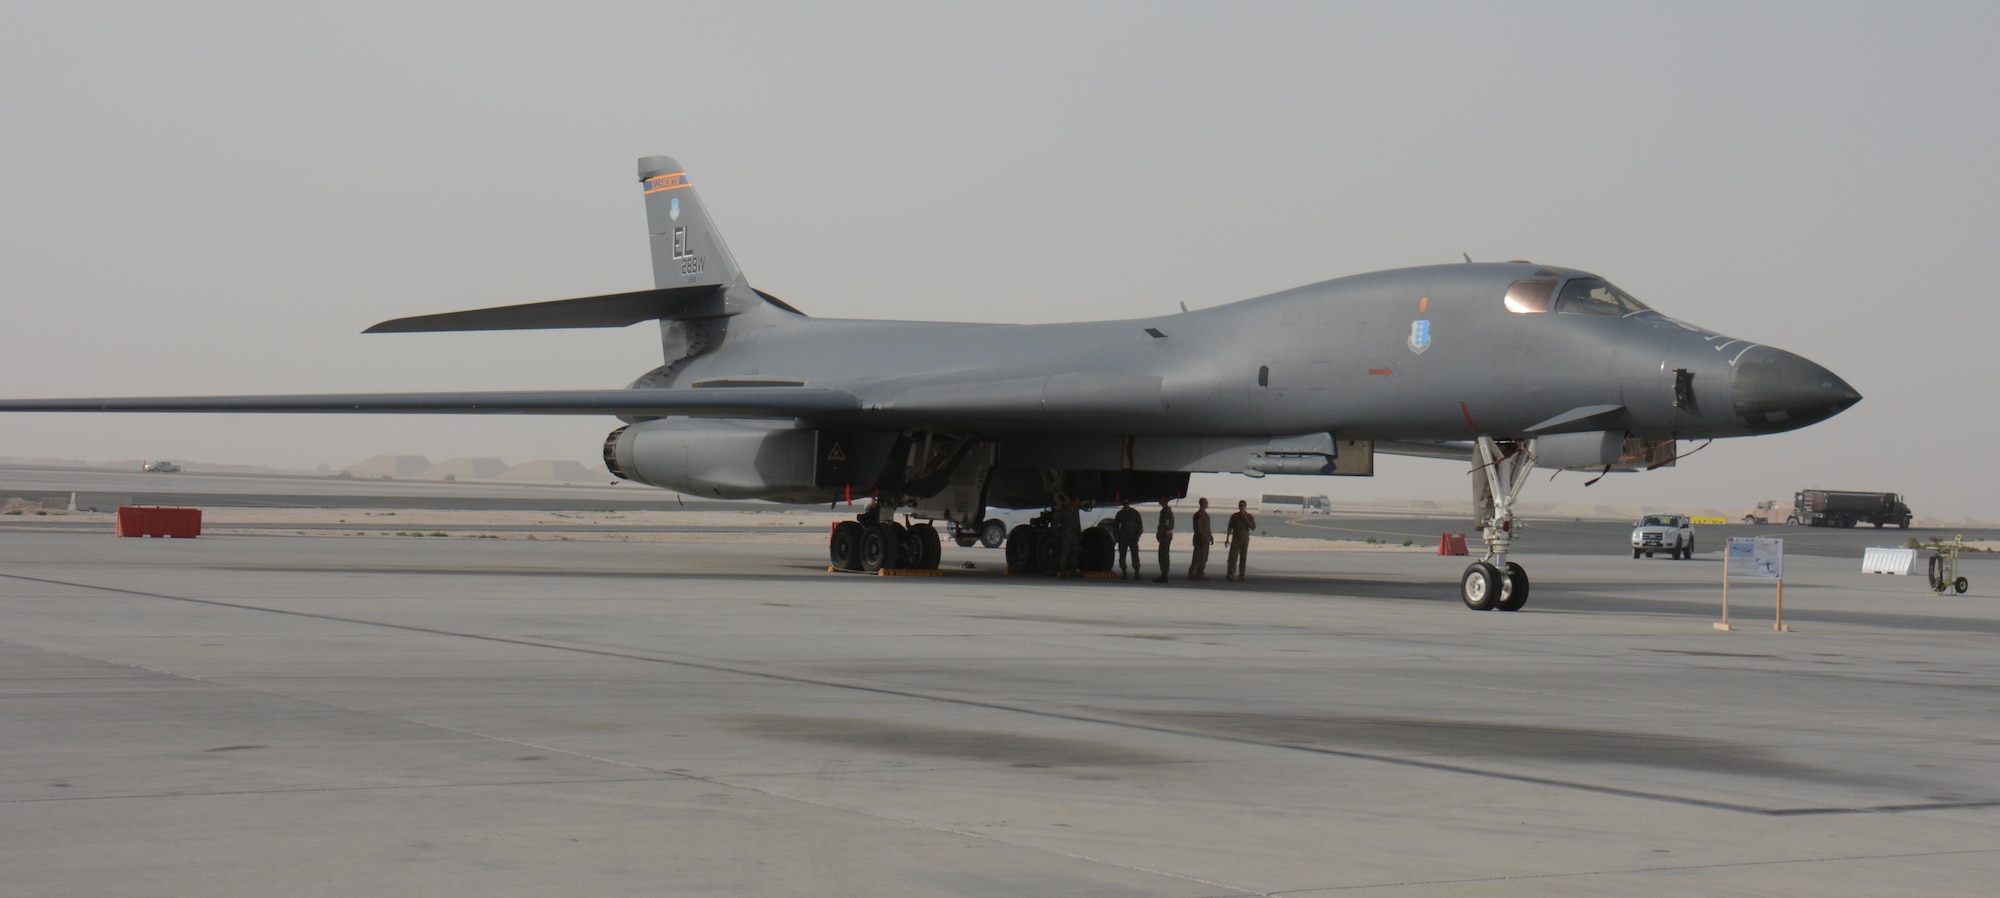 A B-1B Lancer waits for visitors at the annual Flight Line Fest Jan. 10 at Al Udeid Air Base, Qatar. The B-1B fleet at AUAB has dropped thousands of weapons on enemy targets in support of Operations Inherent Resolve and Freedom’s Sentinel over the past year. The B-1B was one of five U.S. Air Force aircraft on display during the event. Flight Line Fest is a joint partnership between the 379th Air Expeditionary Wing and Qatar Emiri Air Force held to foster relations between Qatar and the United States. (U.S. Air Force photo by Tech. Sgt. James Hodgman/Released)